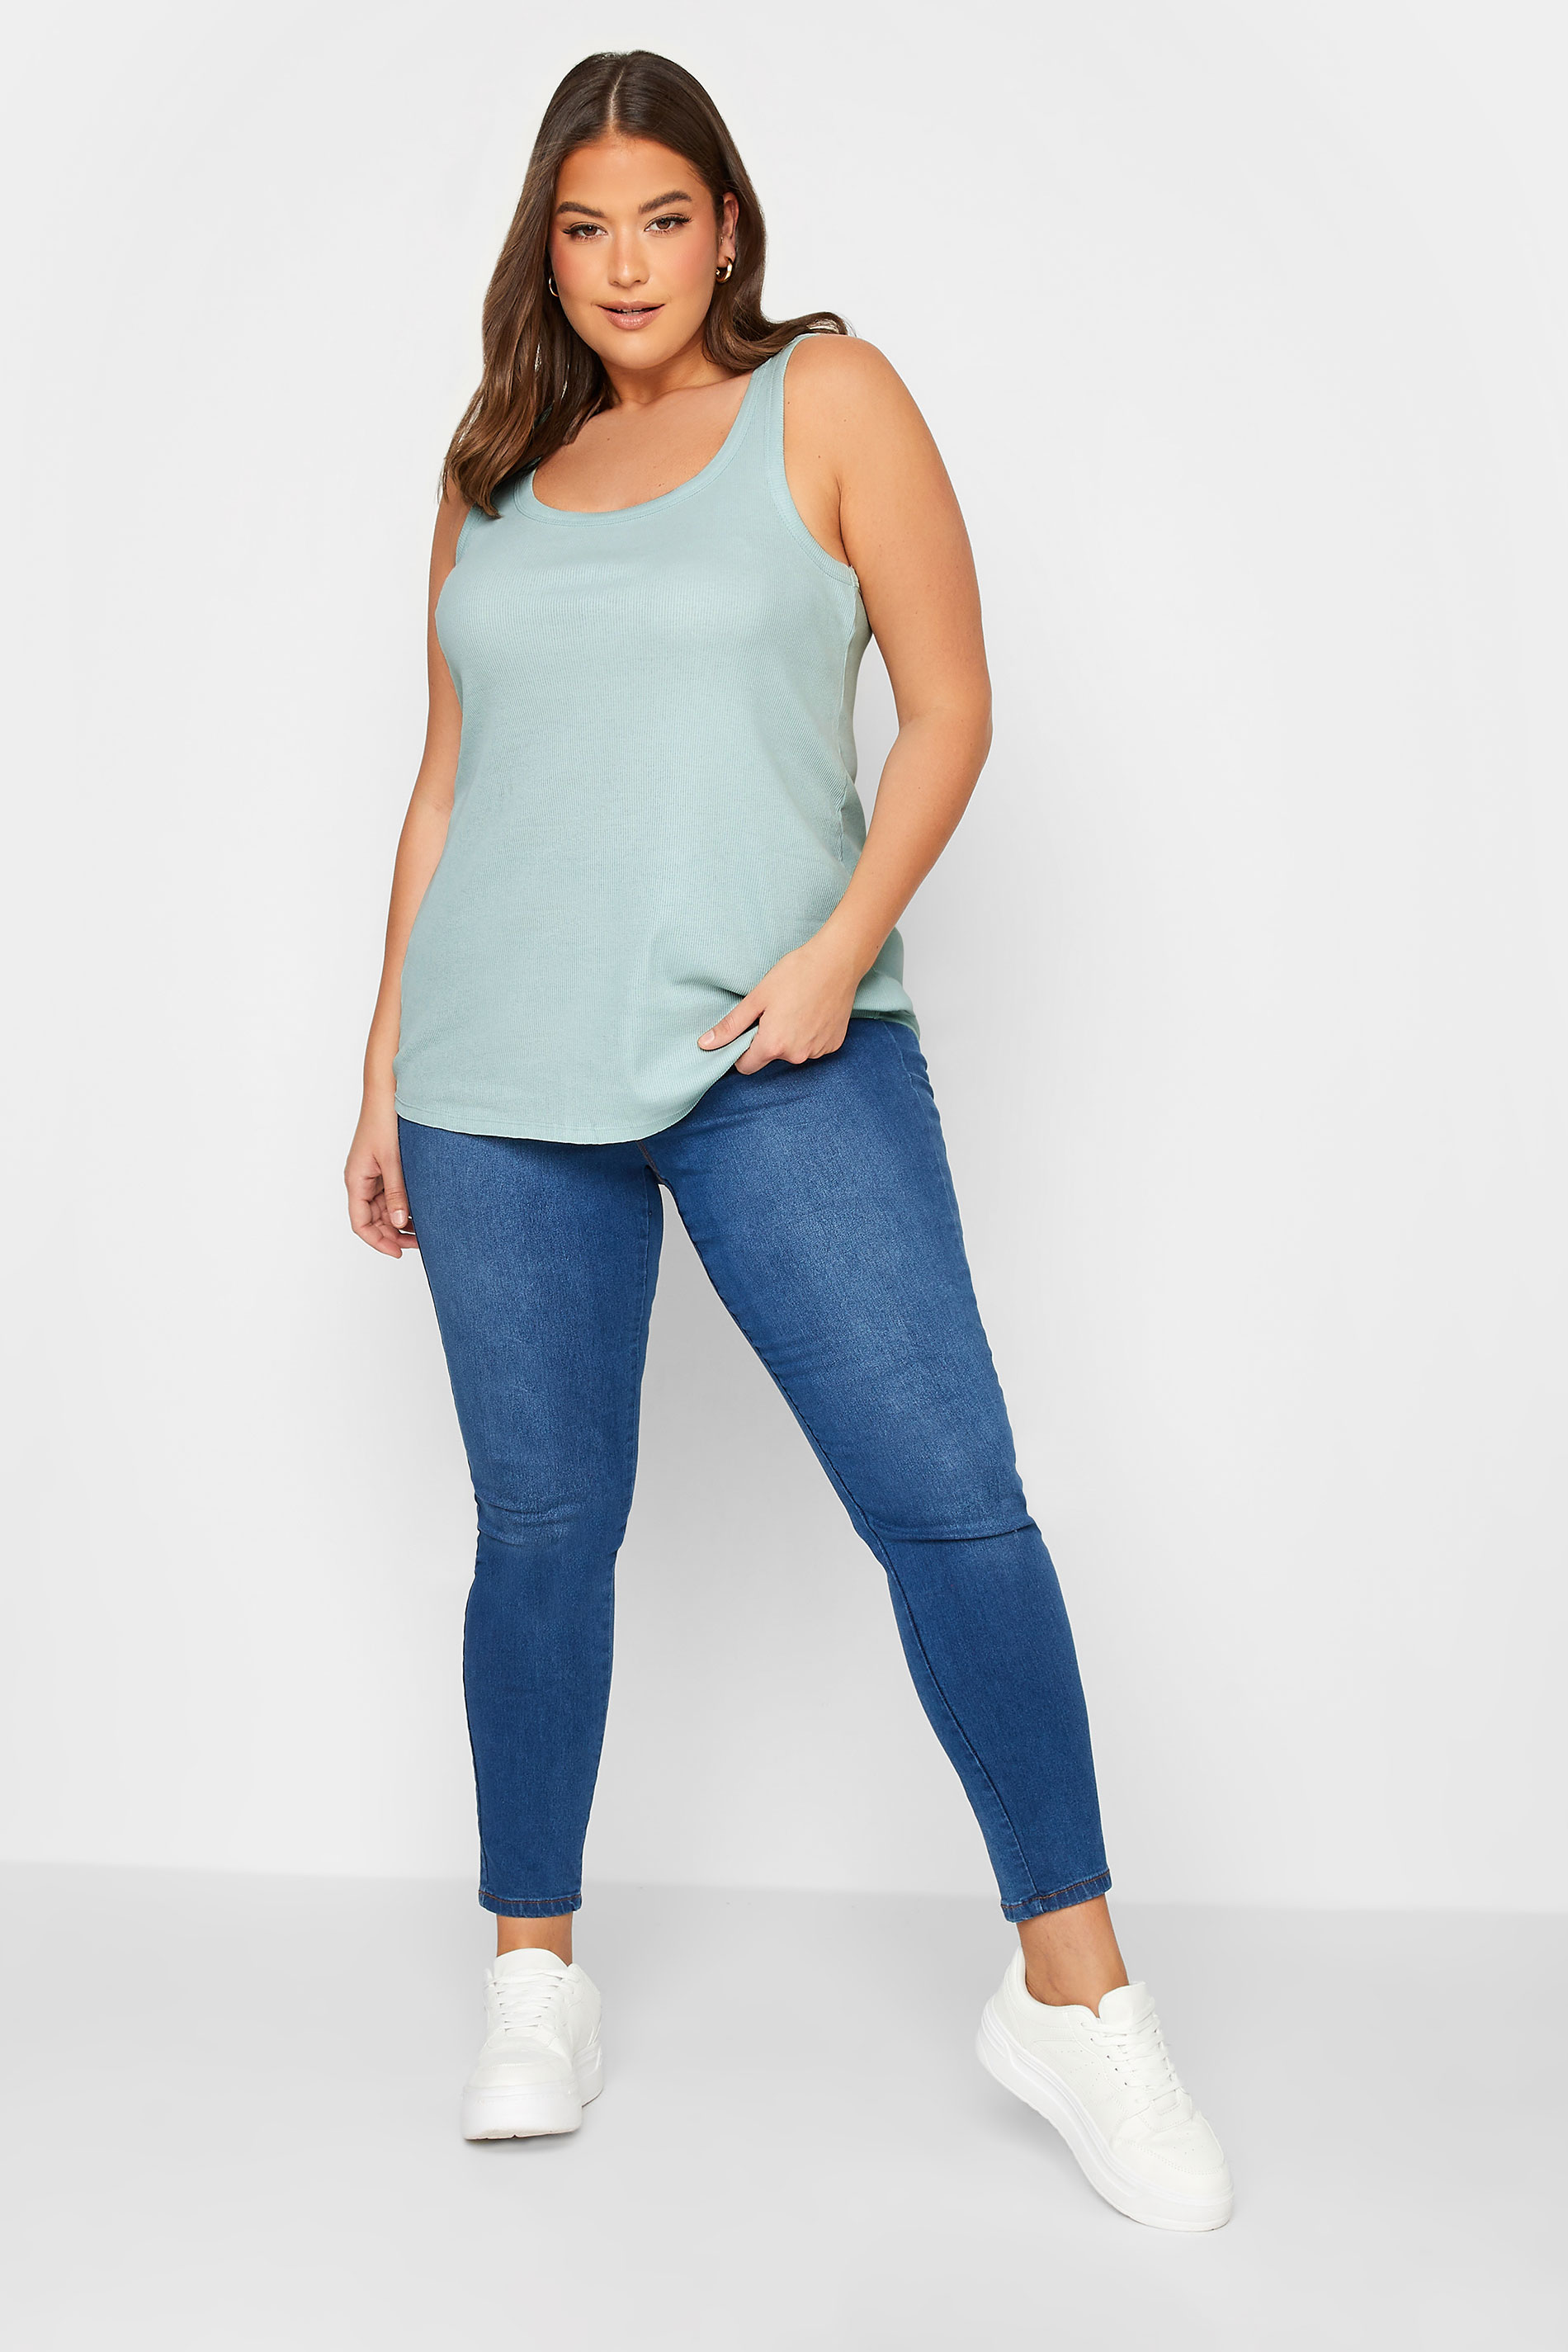 YOURS Curve Plus Size Mint Green Ribbed Racer Back Vest Top | Yours Clothing  3